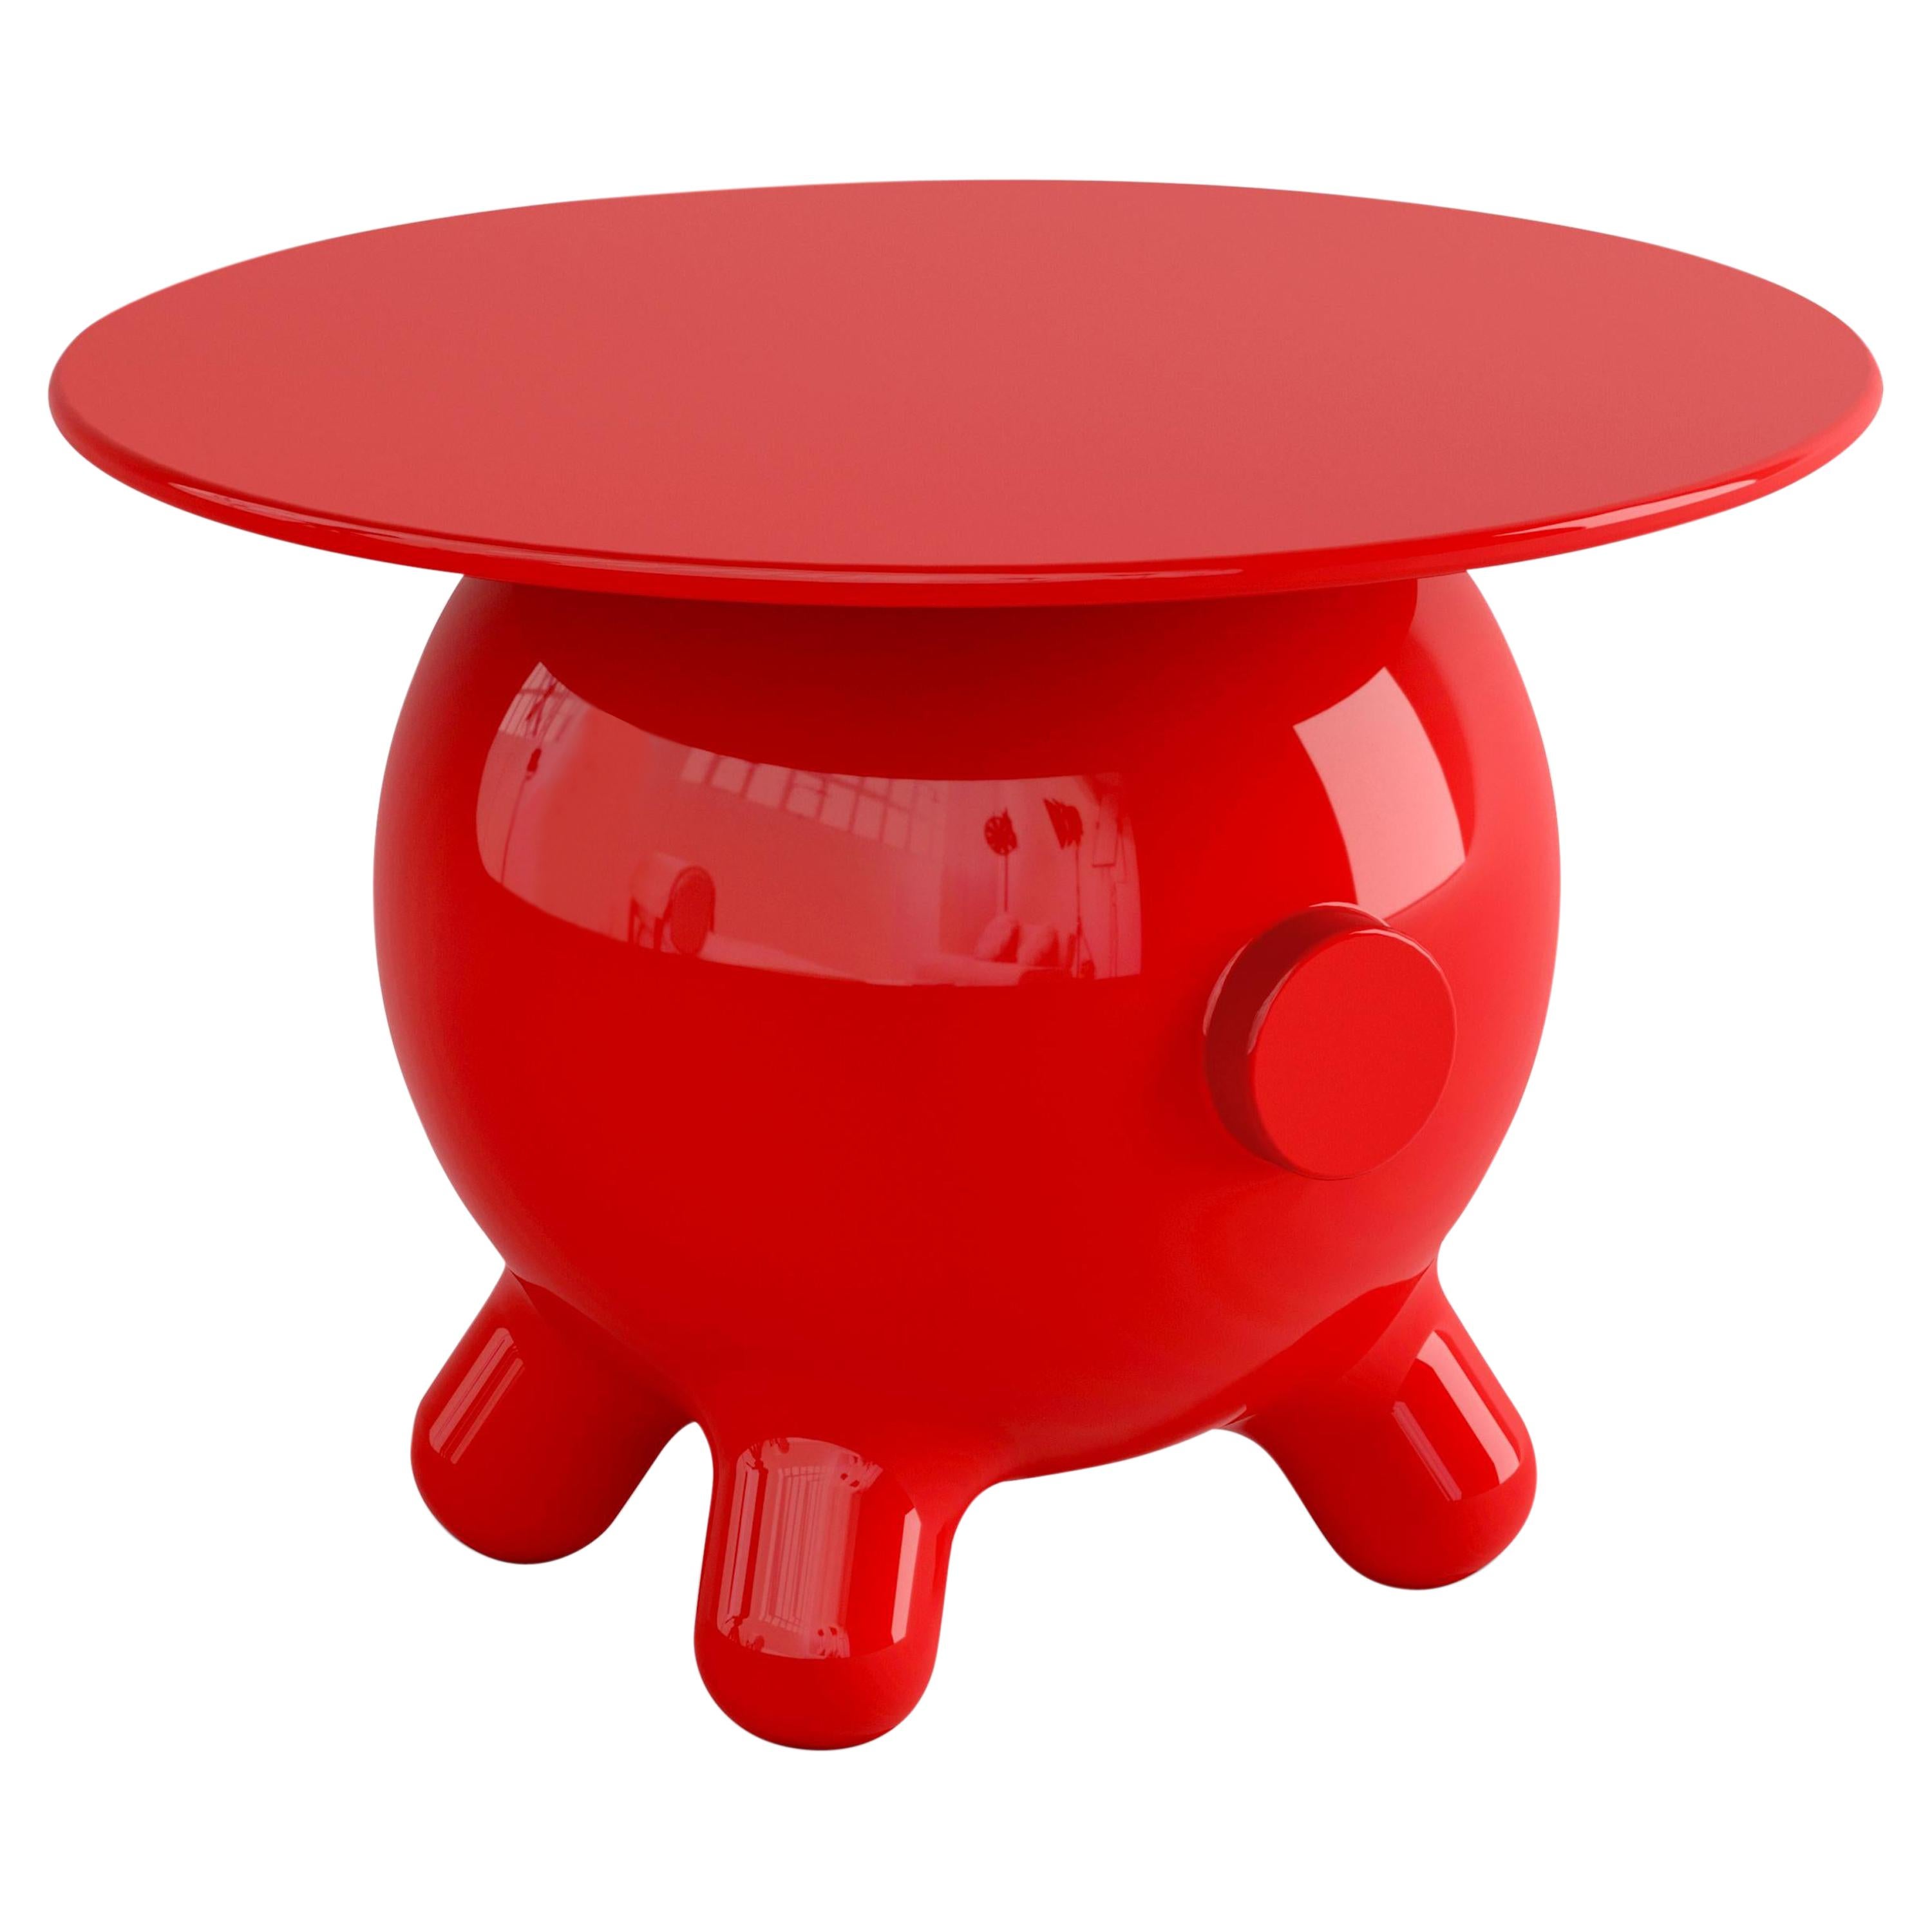 Pogo, Decorative Side Table, Nightstand, in Red by Joel Escalona For Sale